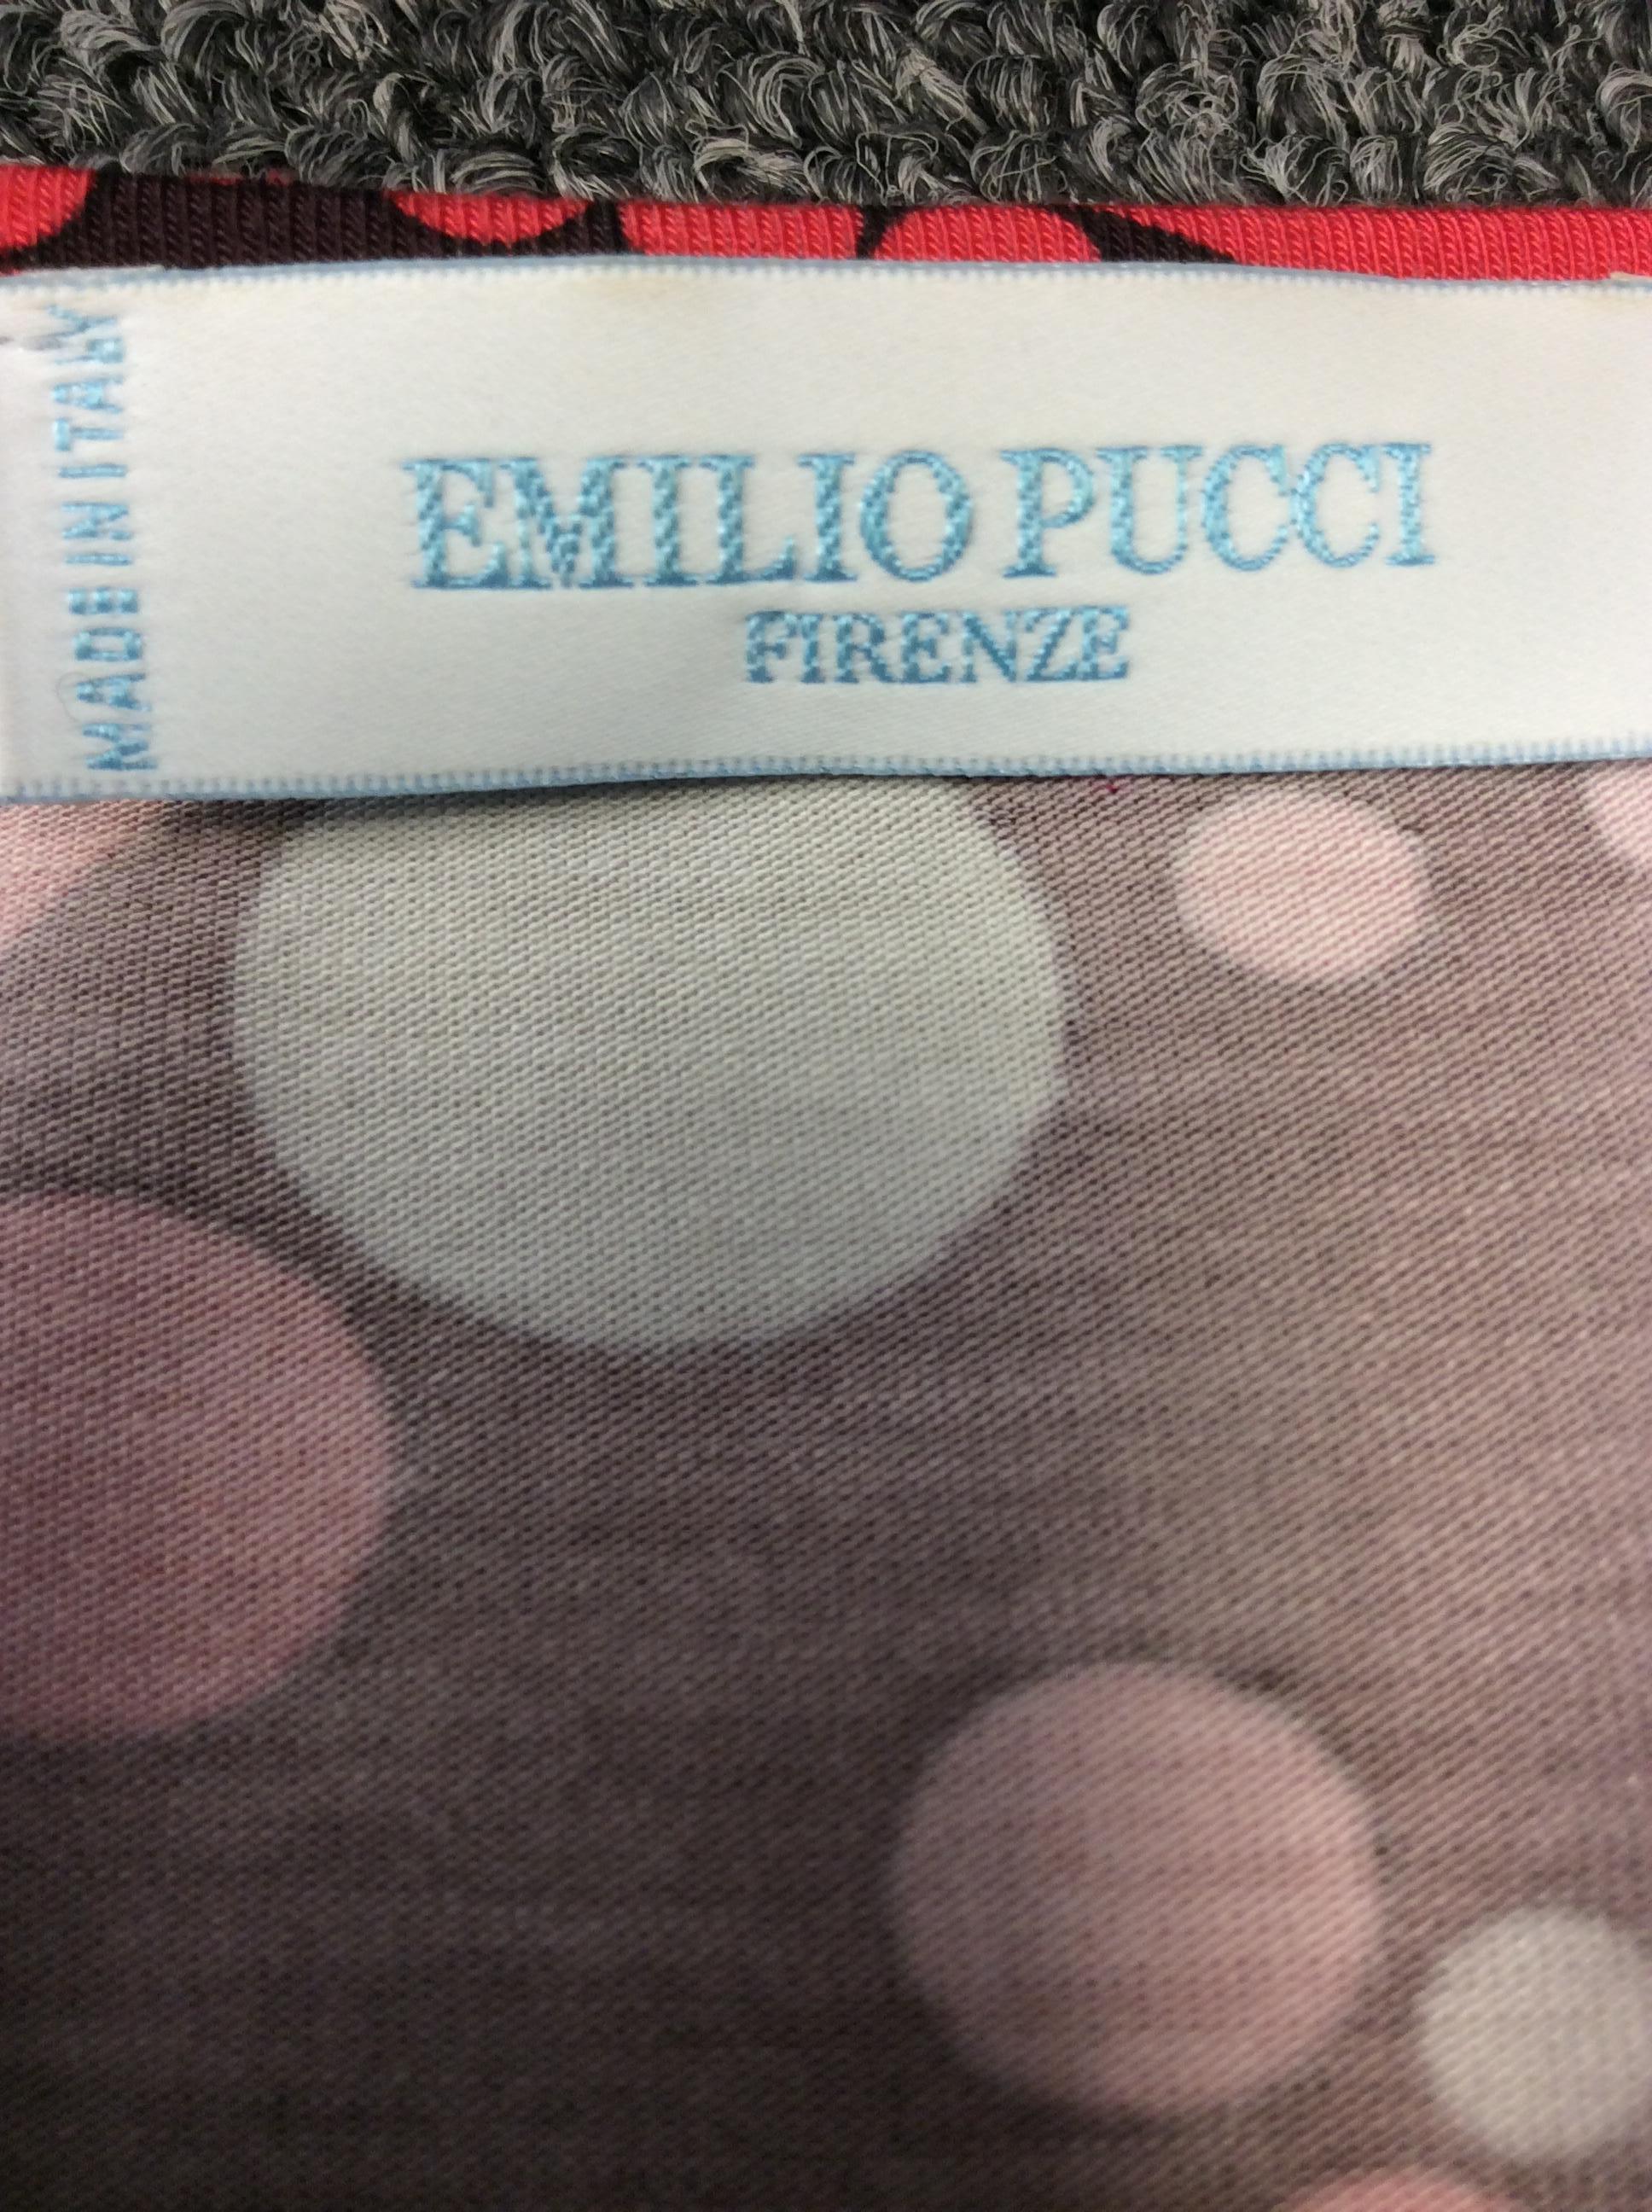 Emilio Pucci Print Long Sleeve Shirt For Sale 2